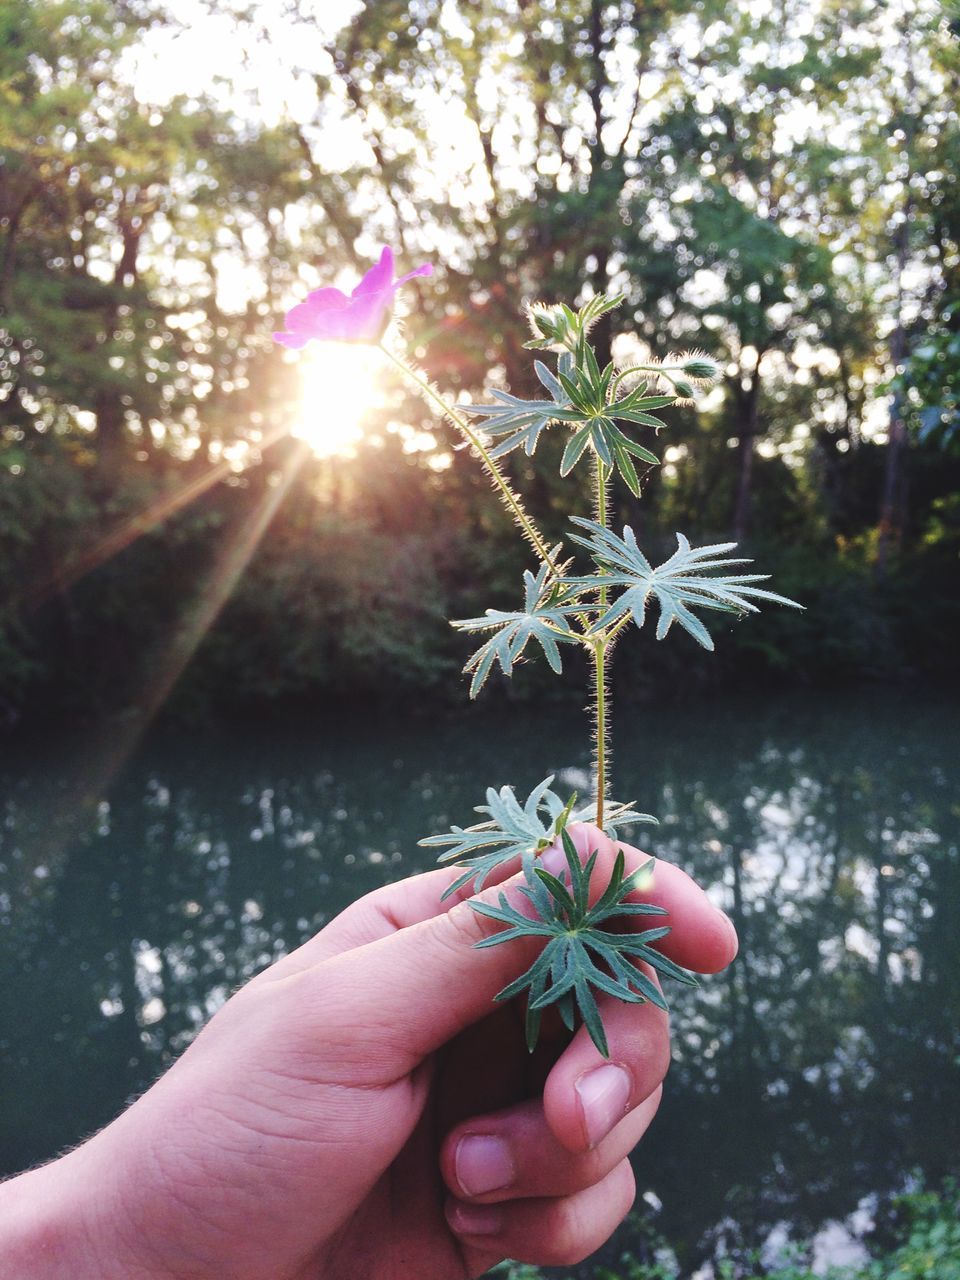 nature, human hand, flower, lens flare, sunlight, sun, outdoors, plant, one person, fragility, beauty in nature, real people, holding, human body part, growth, day, focus on foreground, flower head, close-up, tree, women, freshness, people